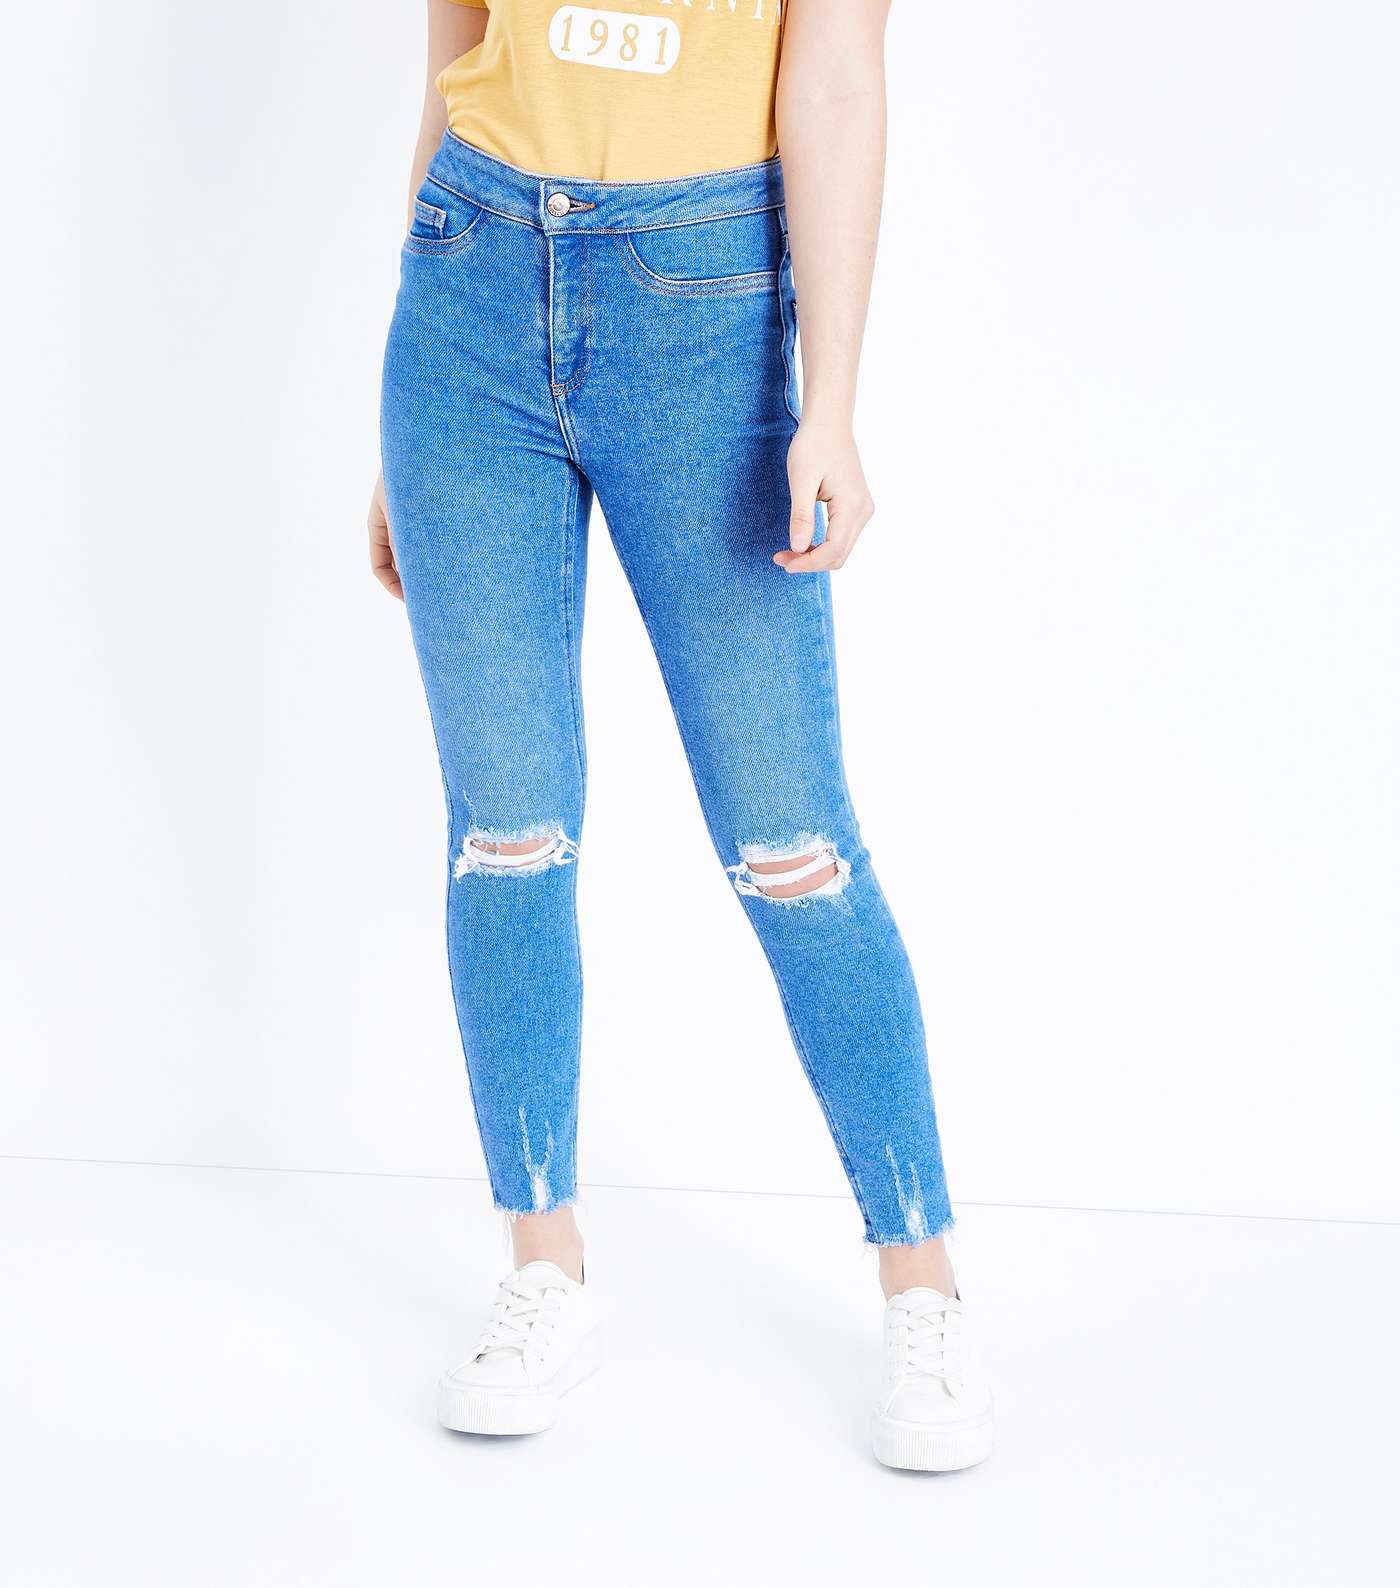 Girls Bright Blue Ripped High Waist Super Skinny Jeans Image 2